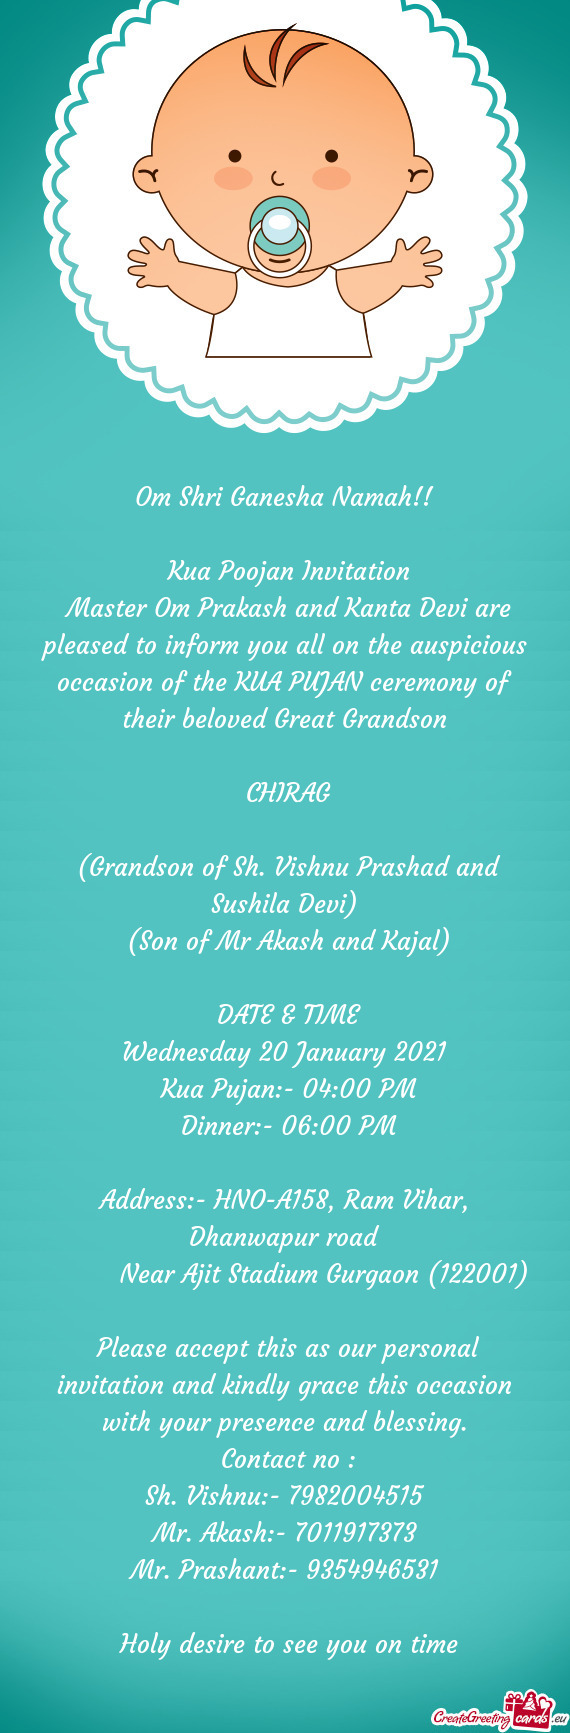 Master Om Prakash and Kanta Devi are pleased to inform you all on the auspicious occasion of the KU